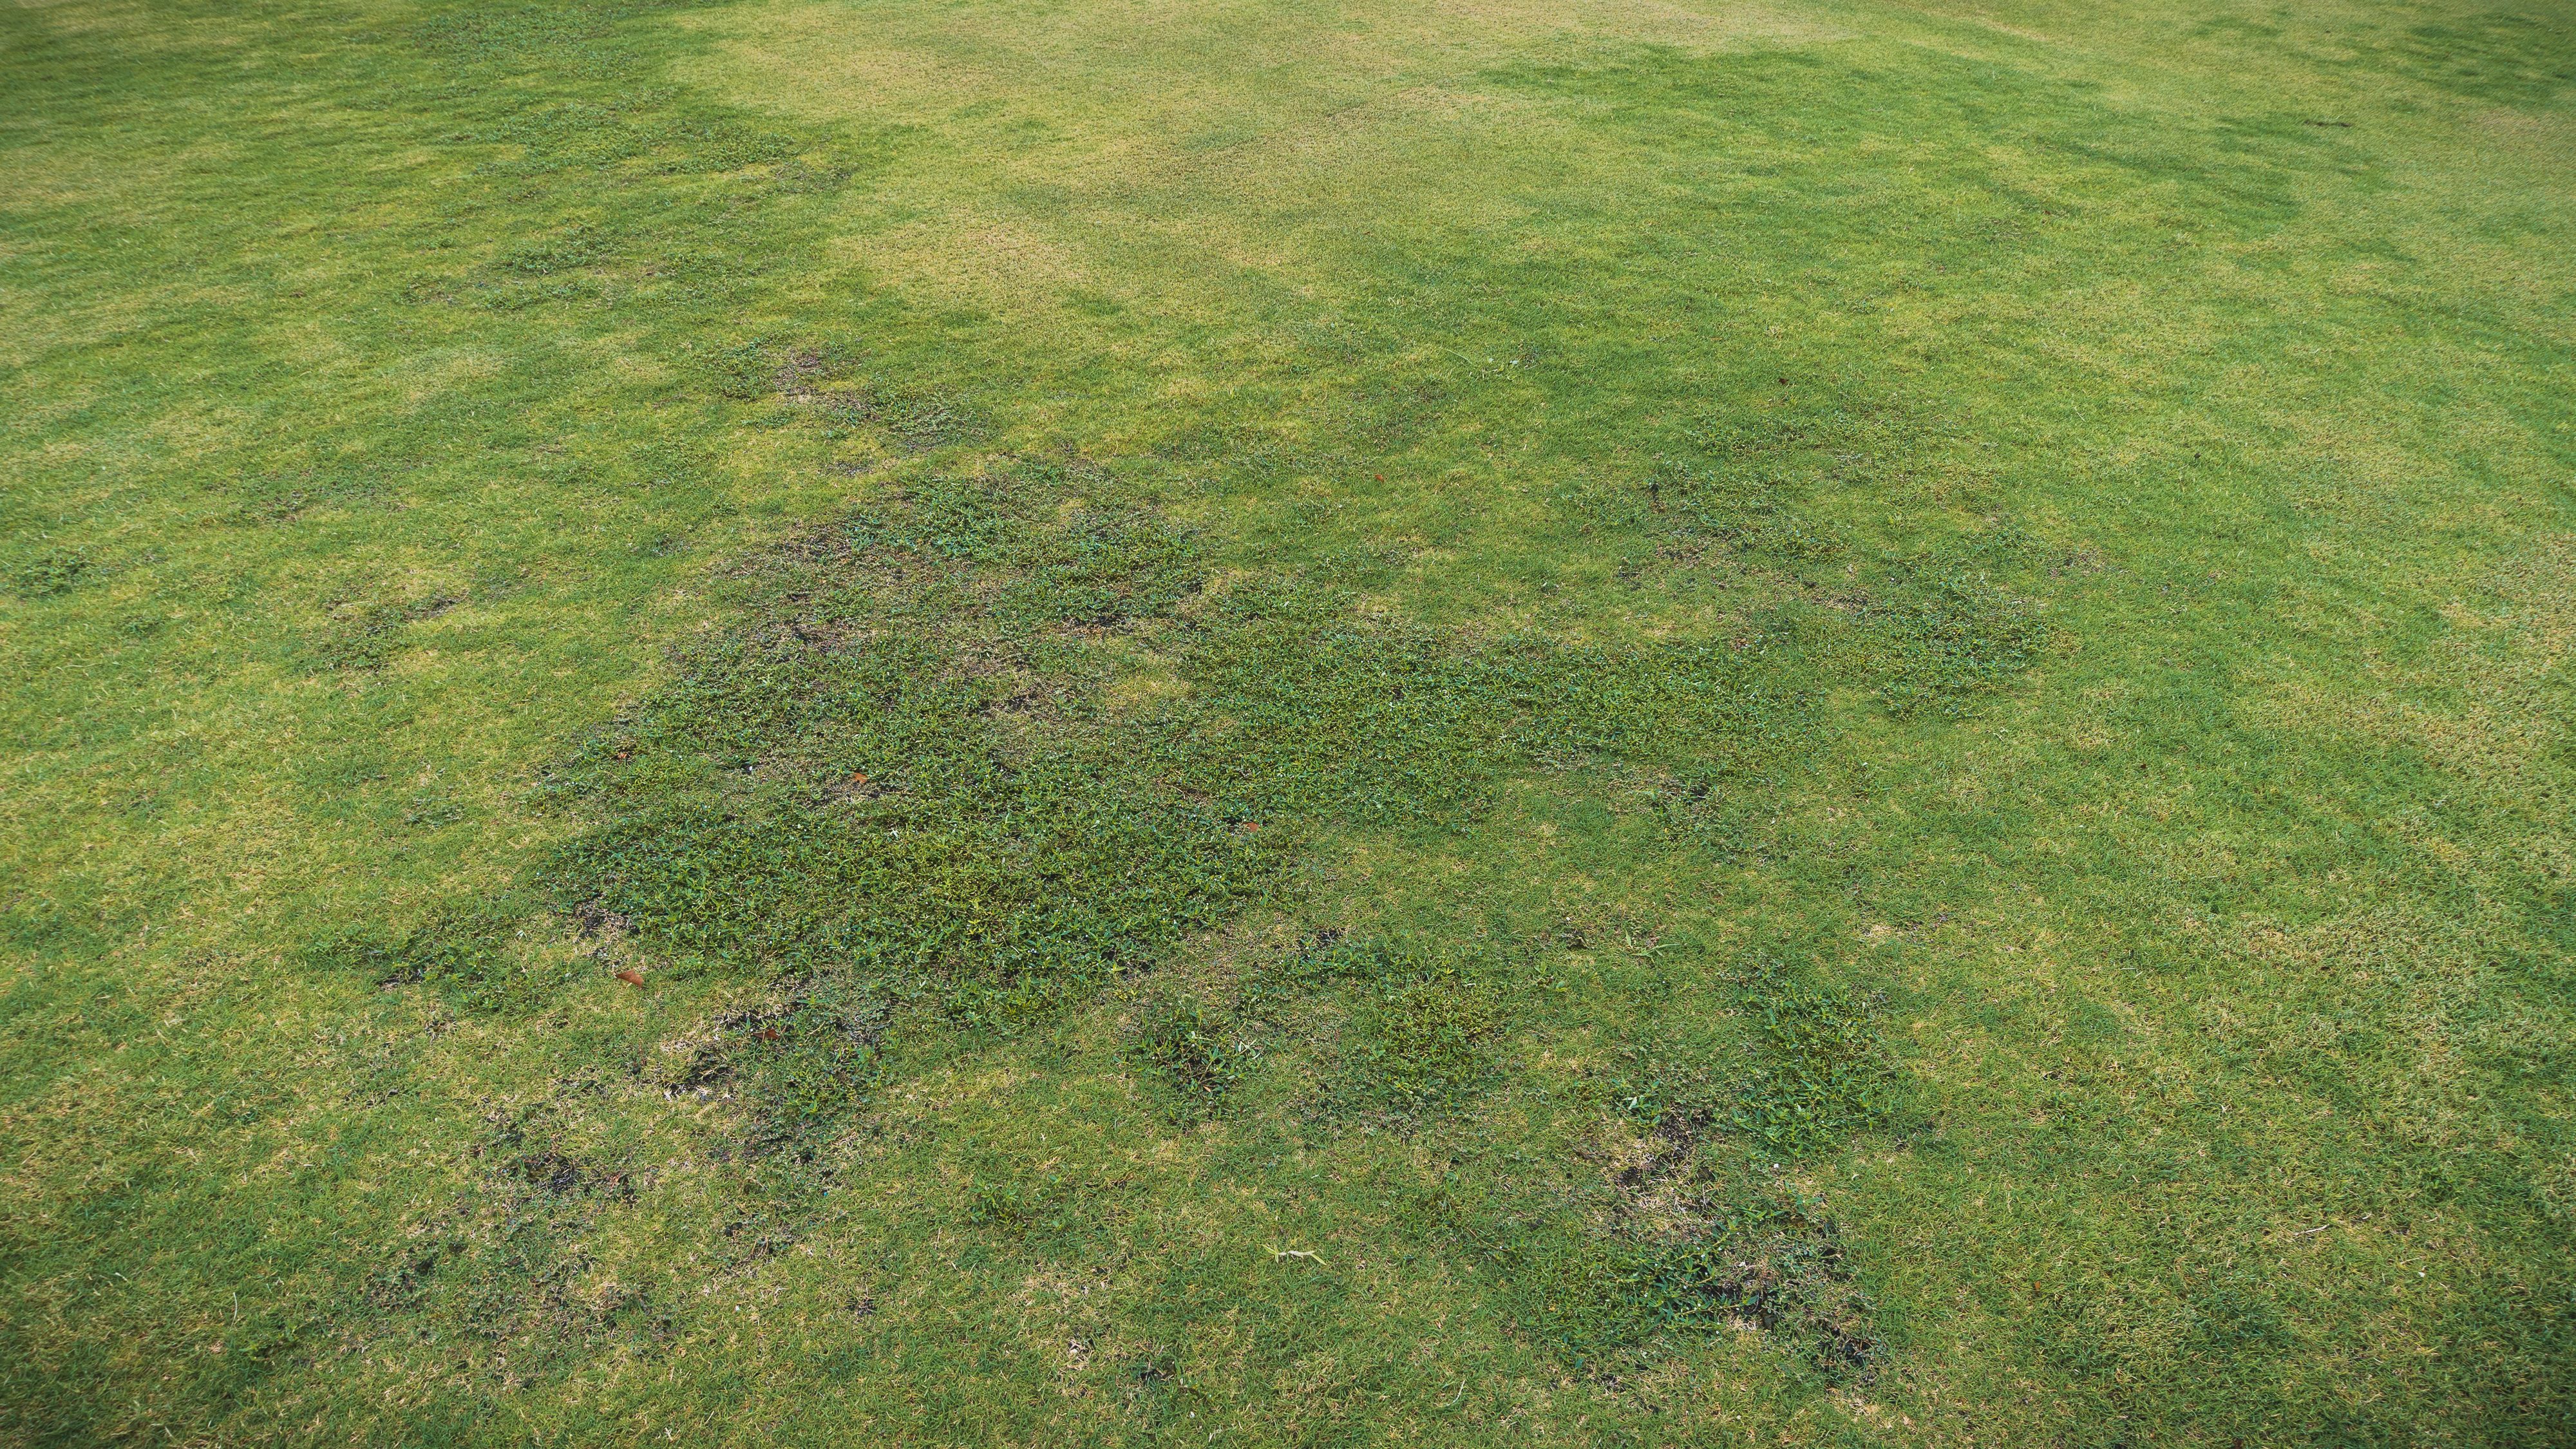 Old world diamondflower encroaching into bare spots after spotted spurge dieback in nematode-damaged ‘Latitude 36’ bermudagrass in southern Florida.